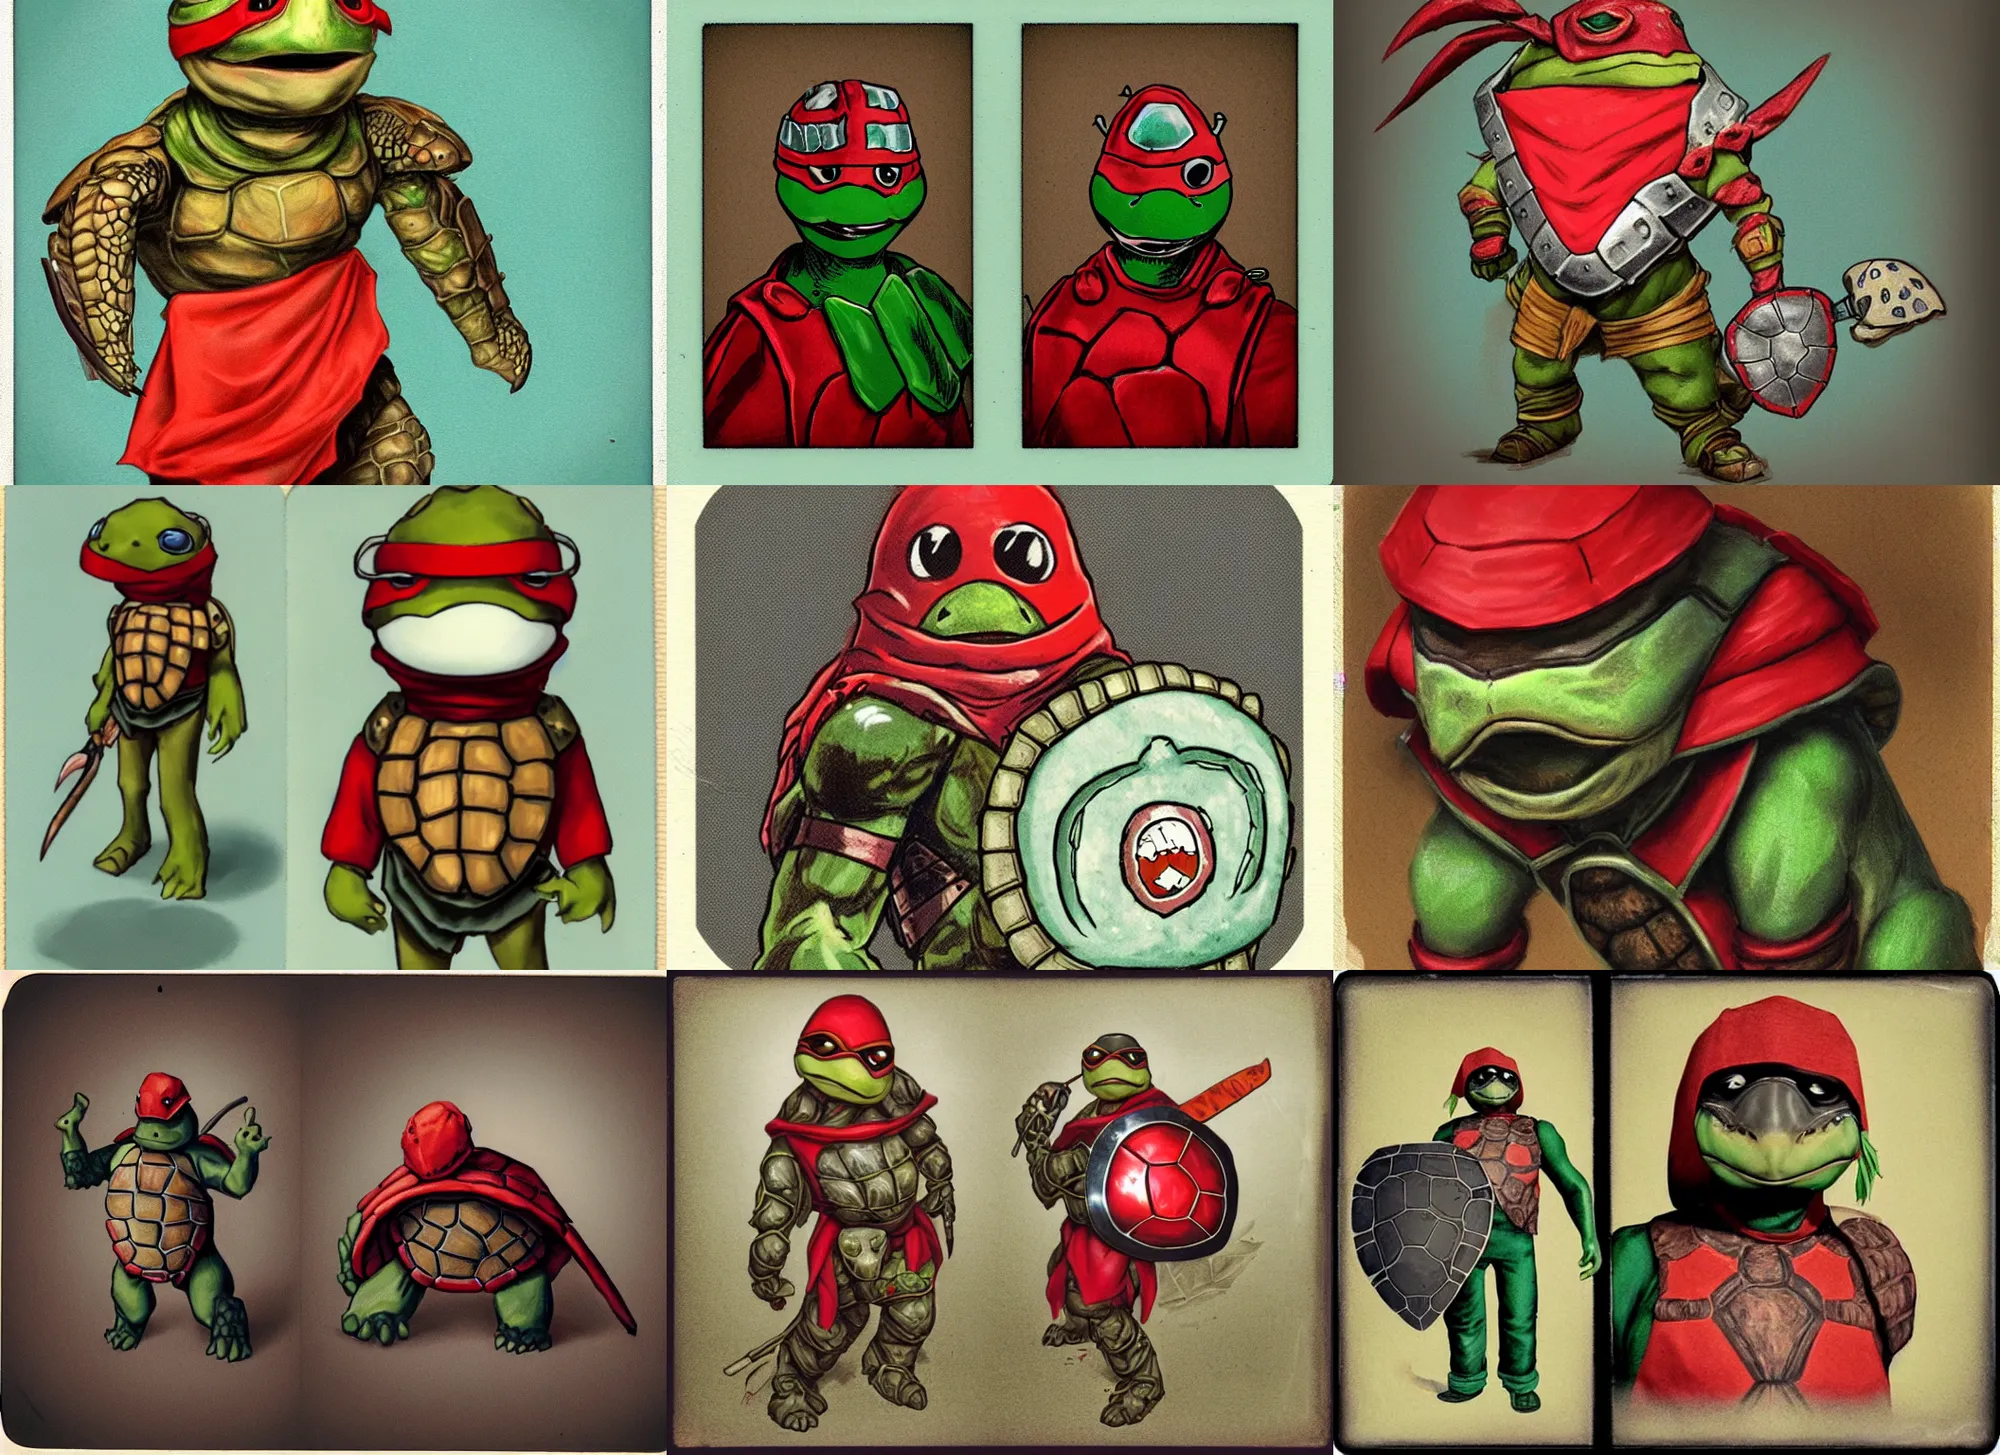 Prompt: anthropomorphic! polaroid, a badass turtle fighter with red bandana on his eyes, protectors on elbows and a shield made out of a turtle shell. polaroid, color vintage